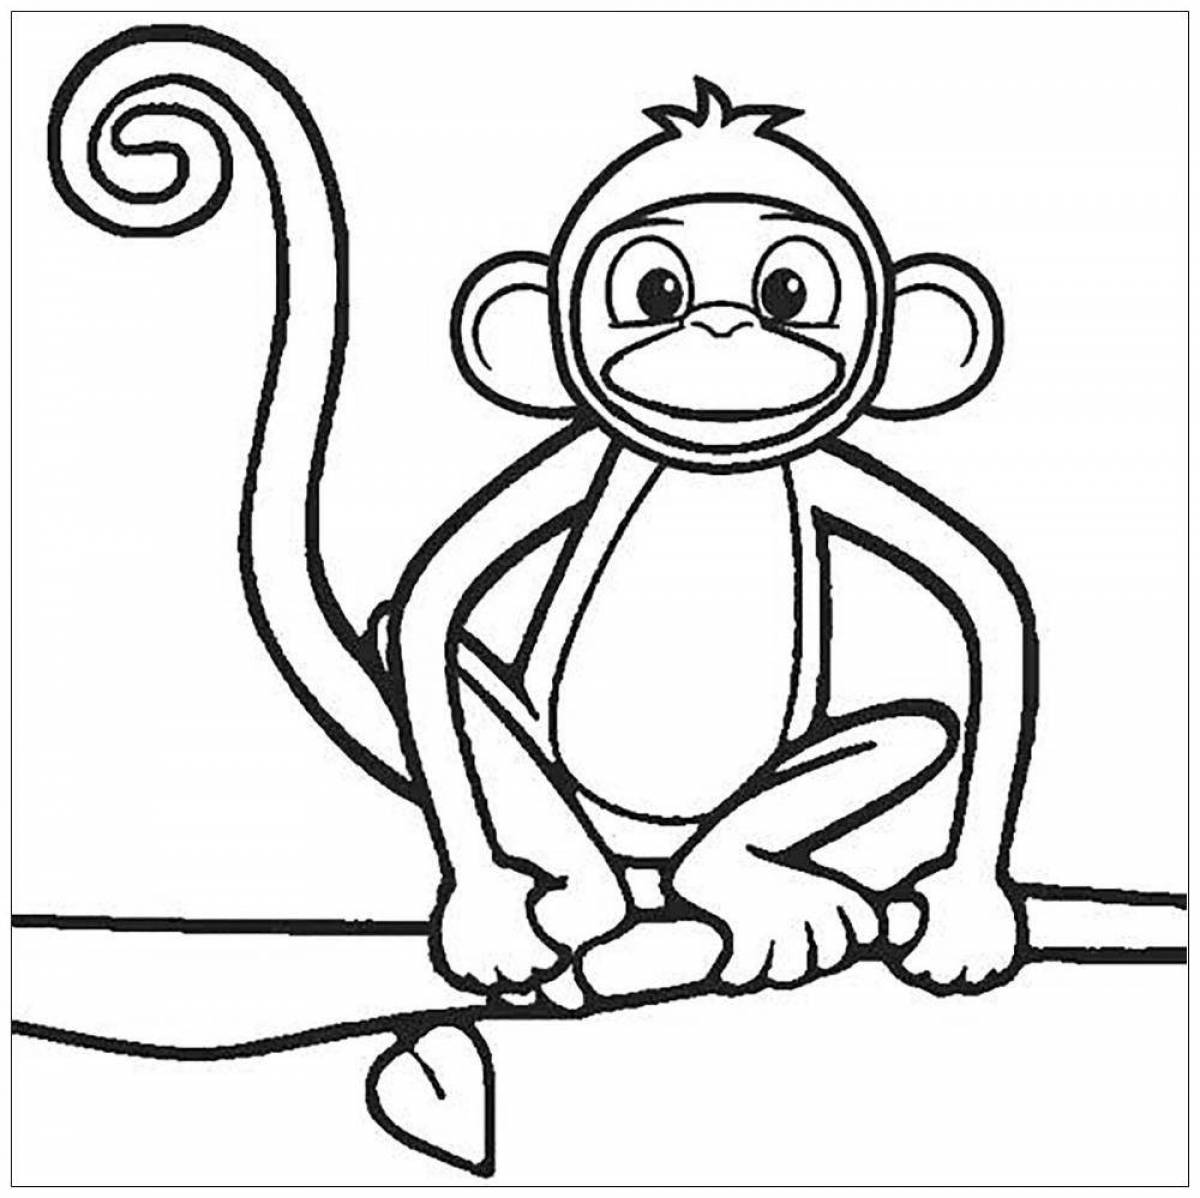 Colorful chimpanzee coloring book for kids